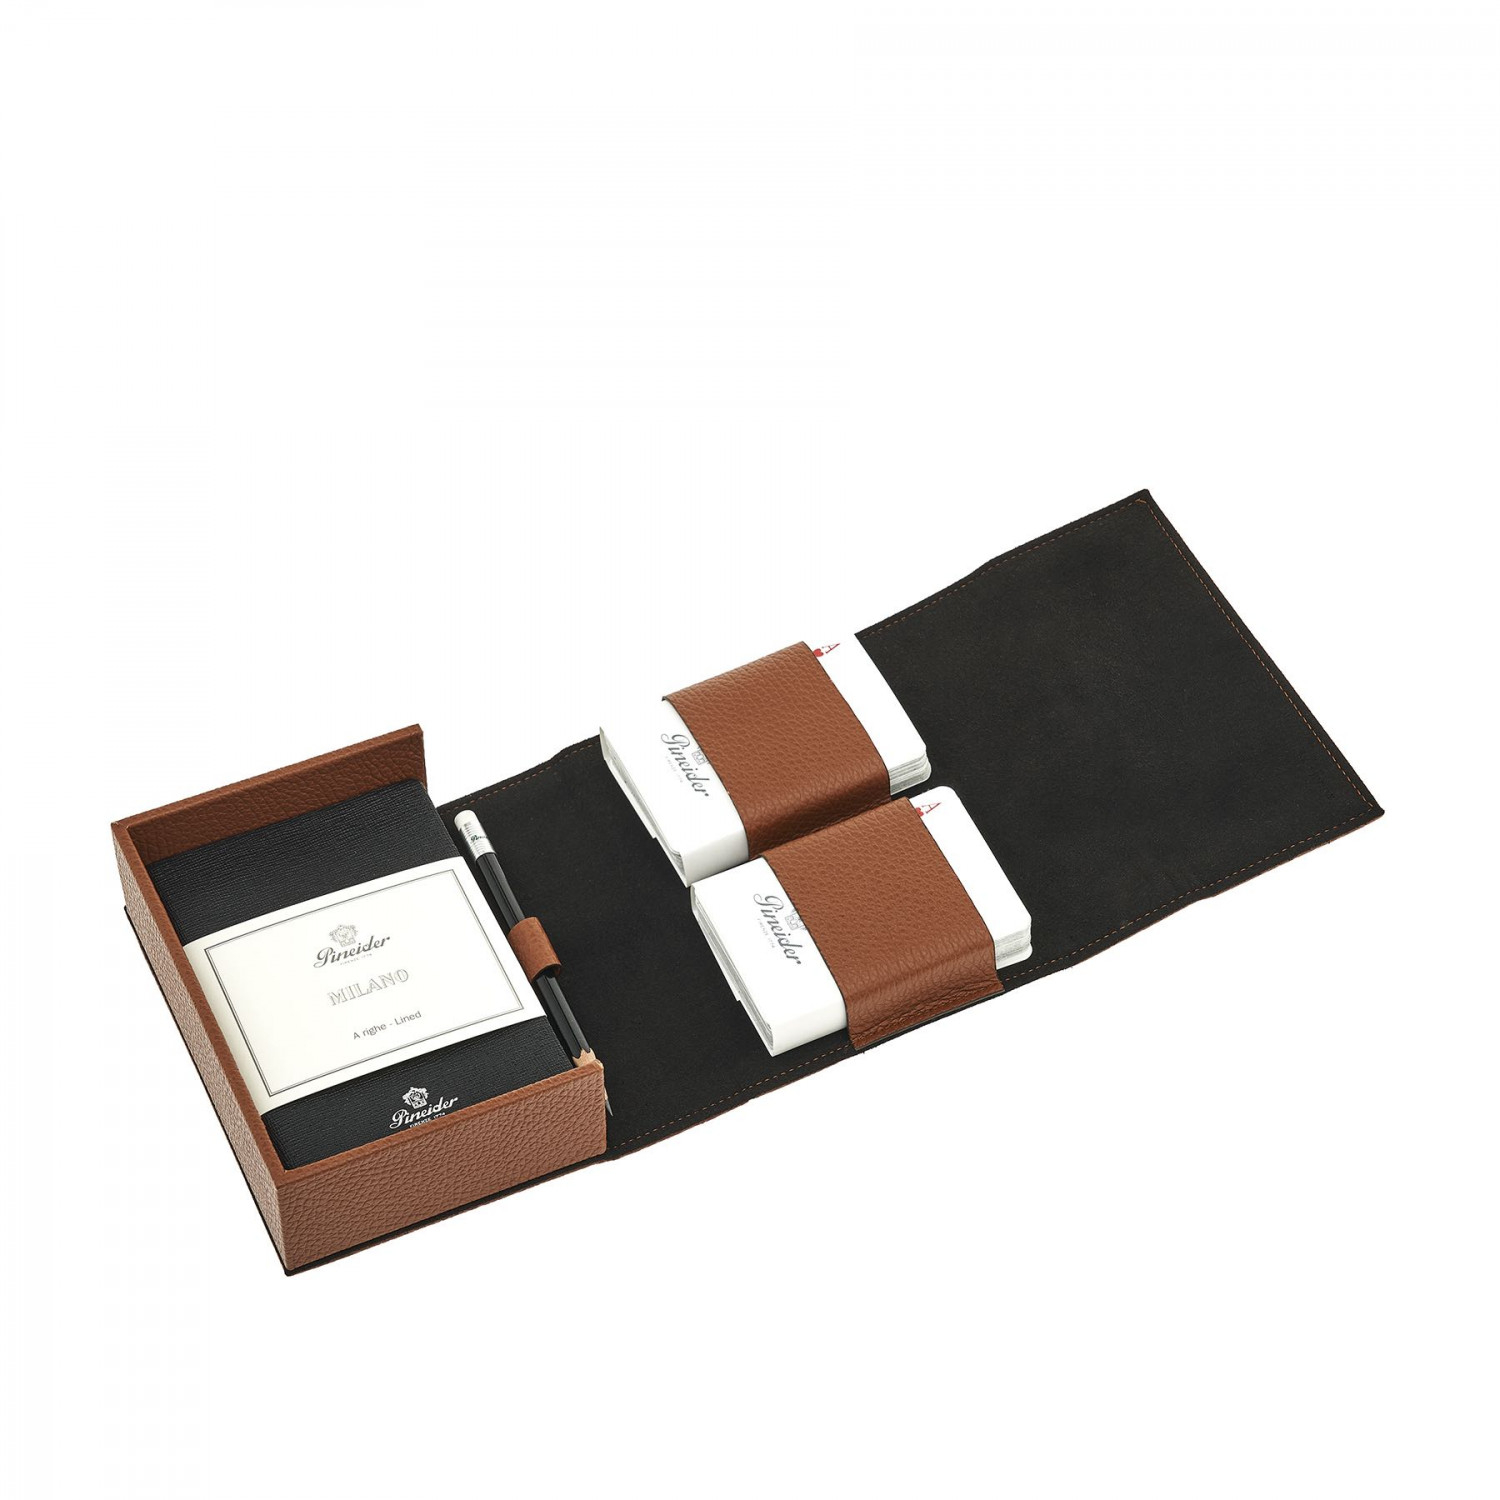 Burraco playing cards set in leather